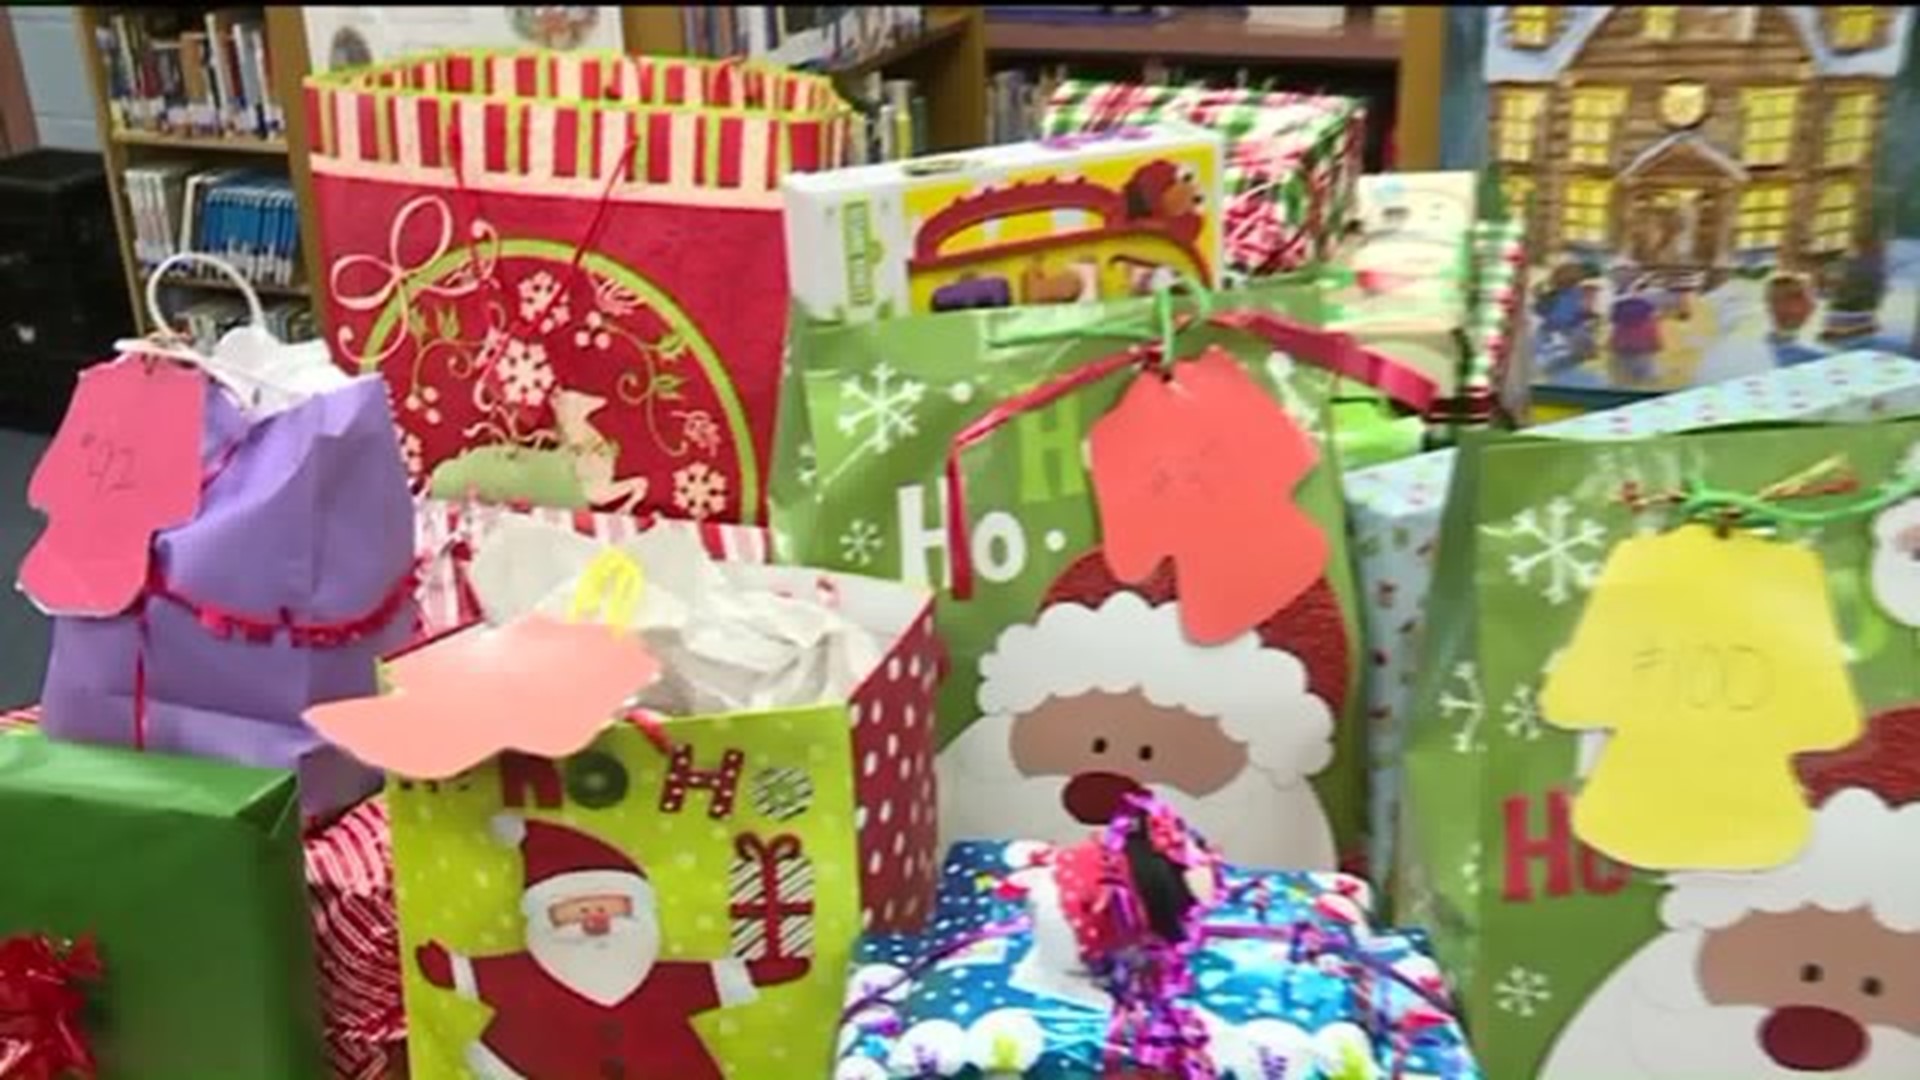 Wyoming Area Catholic Gives Gifts To Needy Families In Luzerne, Lackawanna Counties